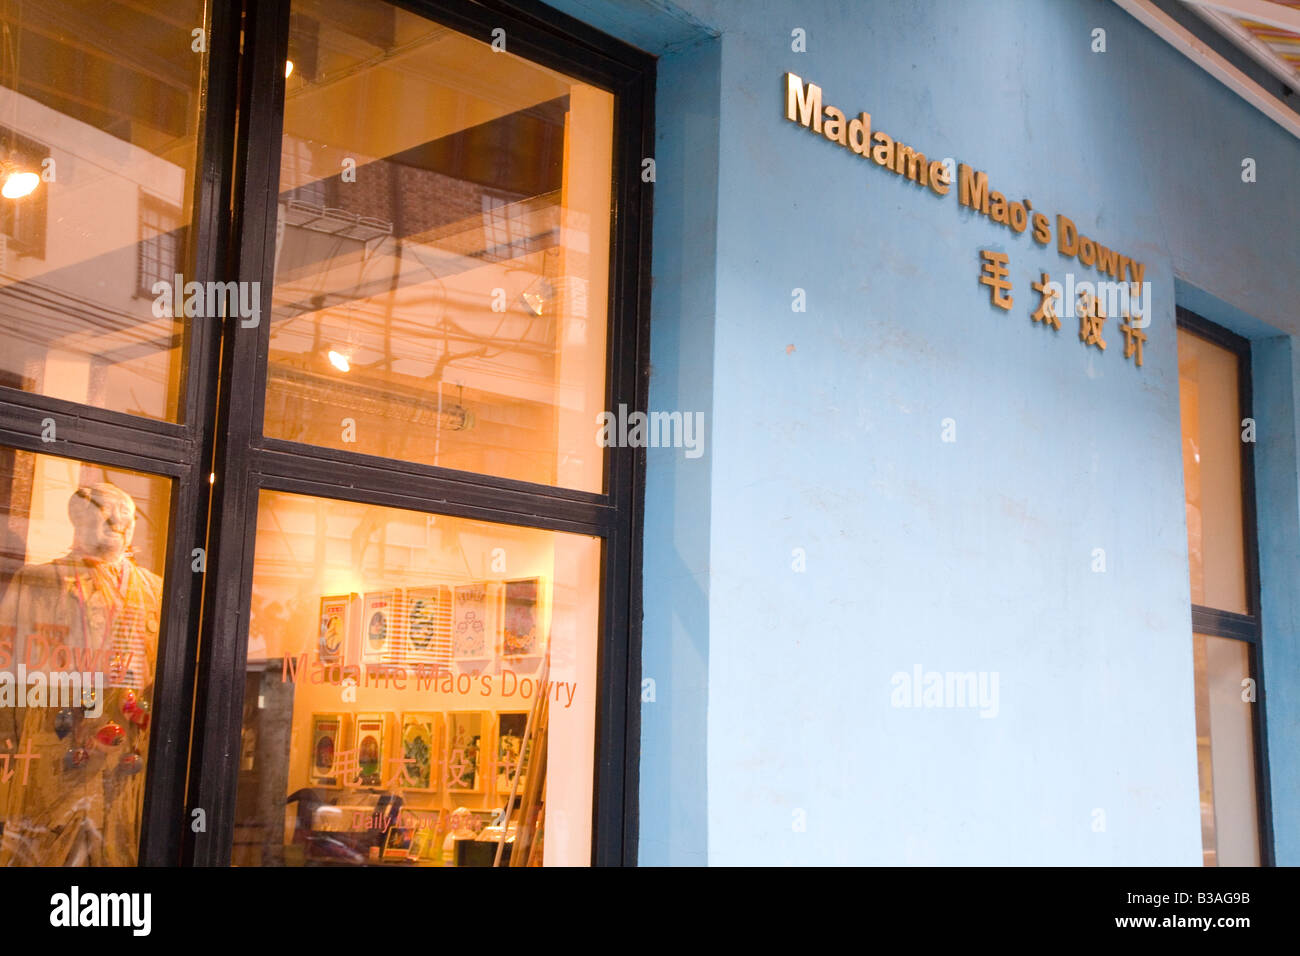 Madame Mao's Dowry - boutique shop in Shanghai Stock Photo